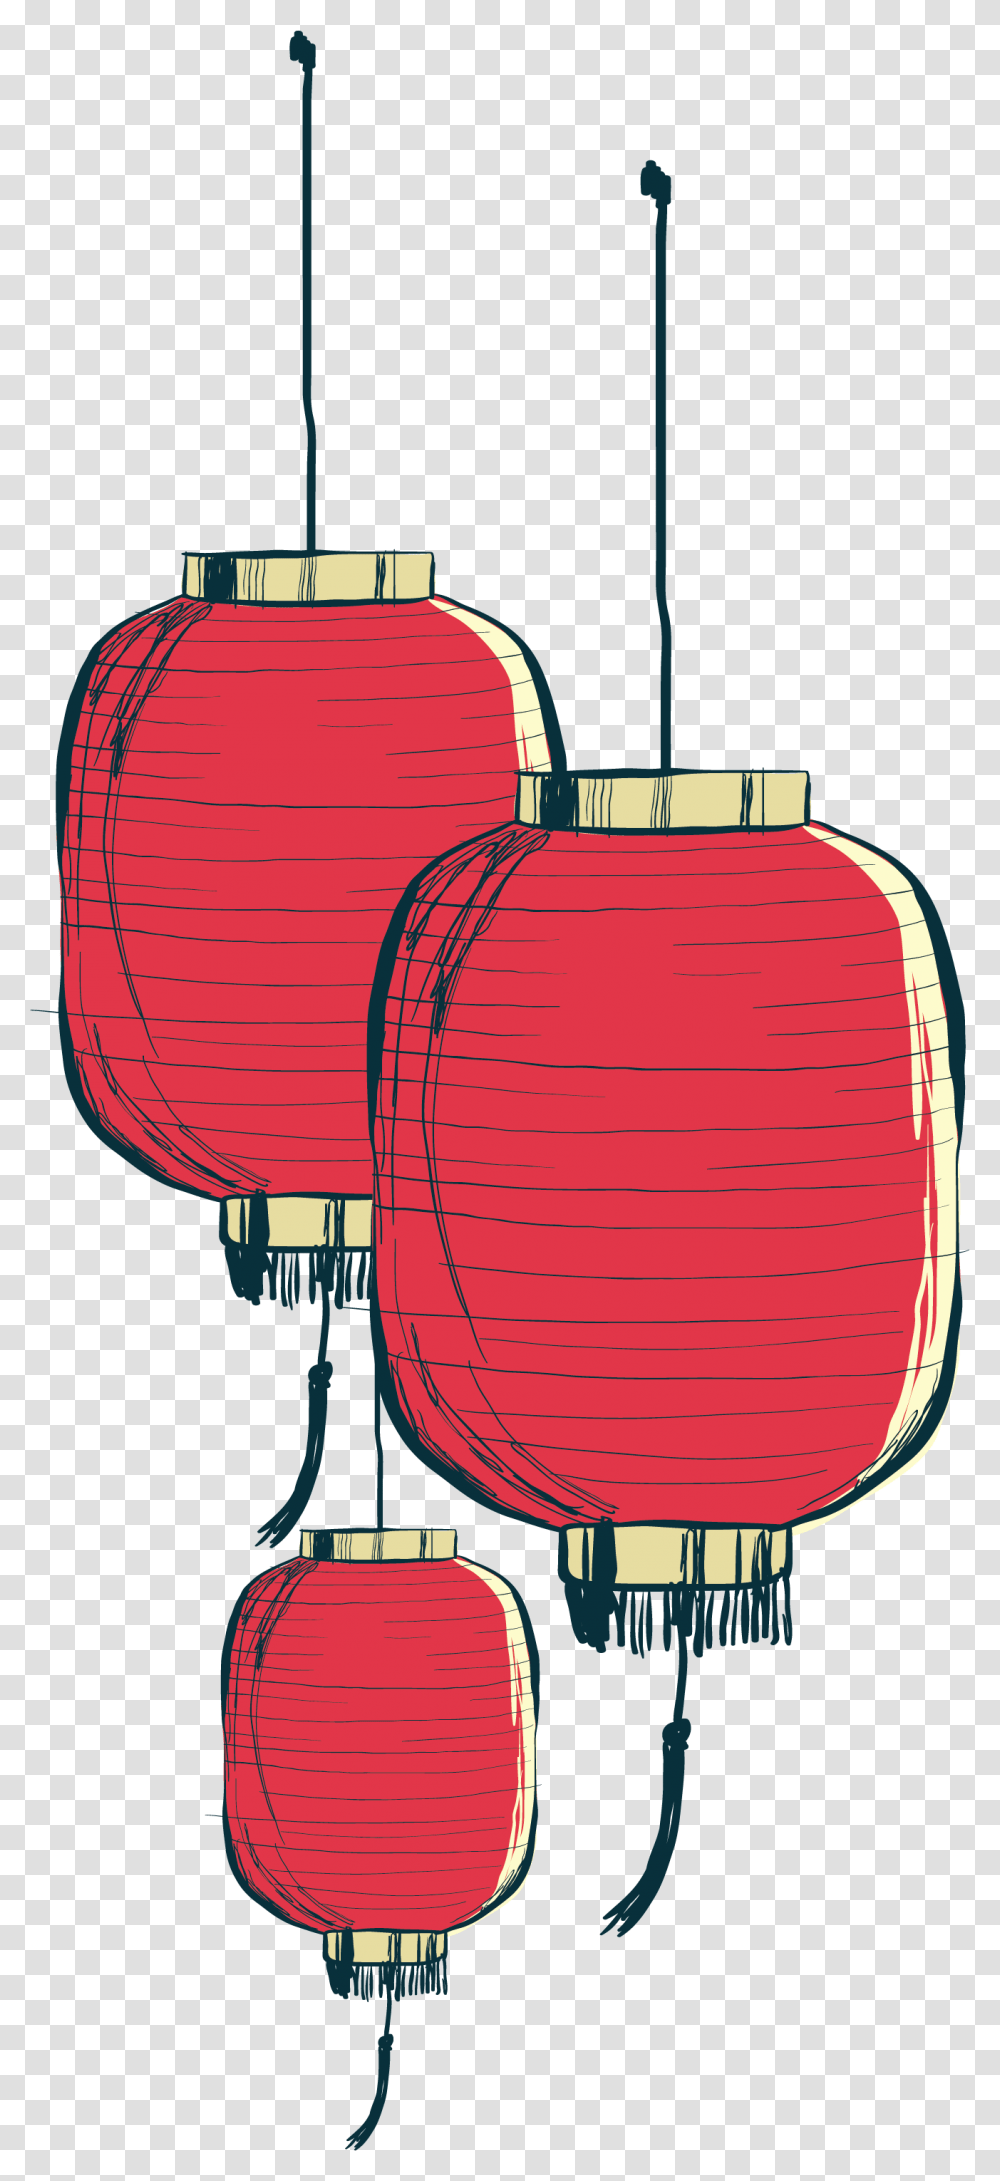 Painted Paper Chinese Hand Lantern Download Free Chinese Lantern Vector, Lamp, Lampshade, Label Transparent Png